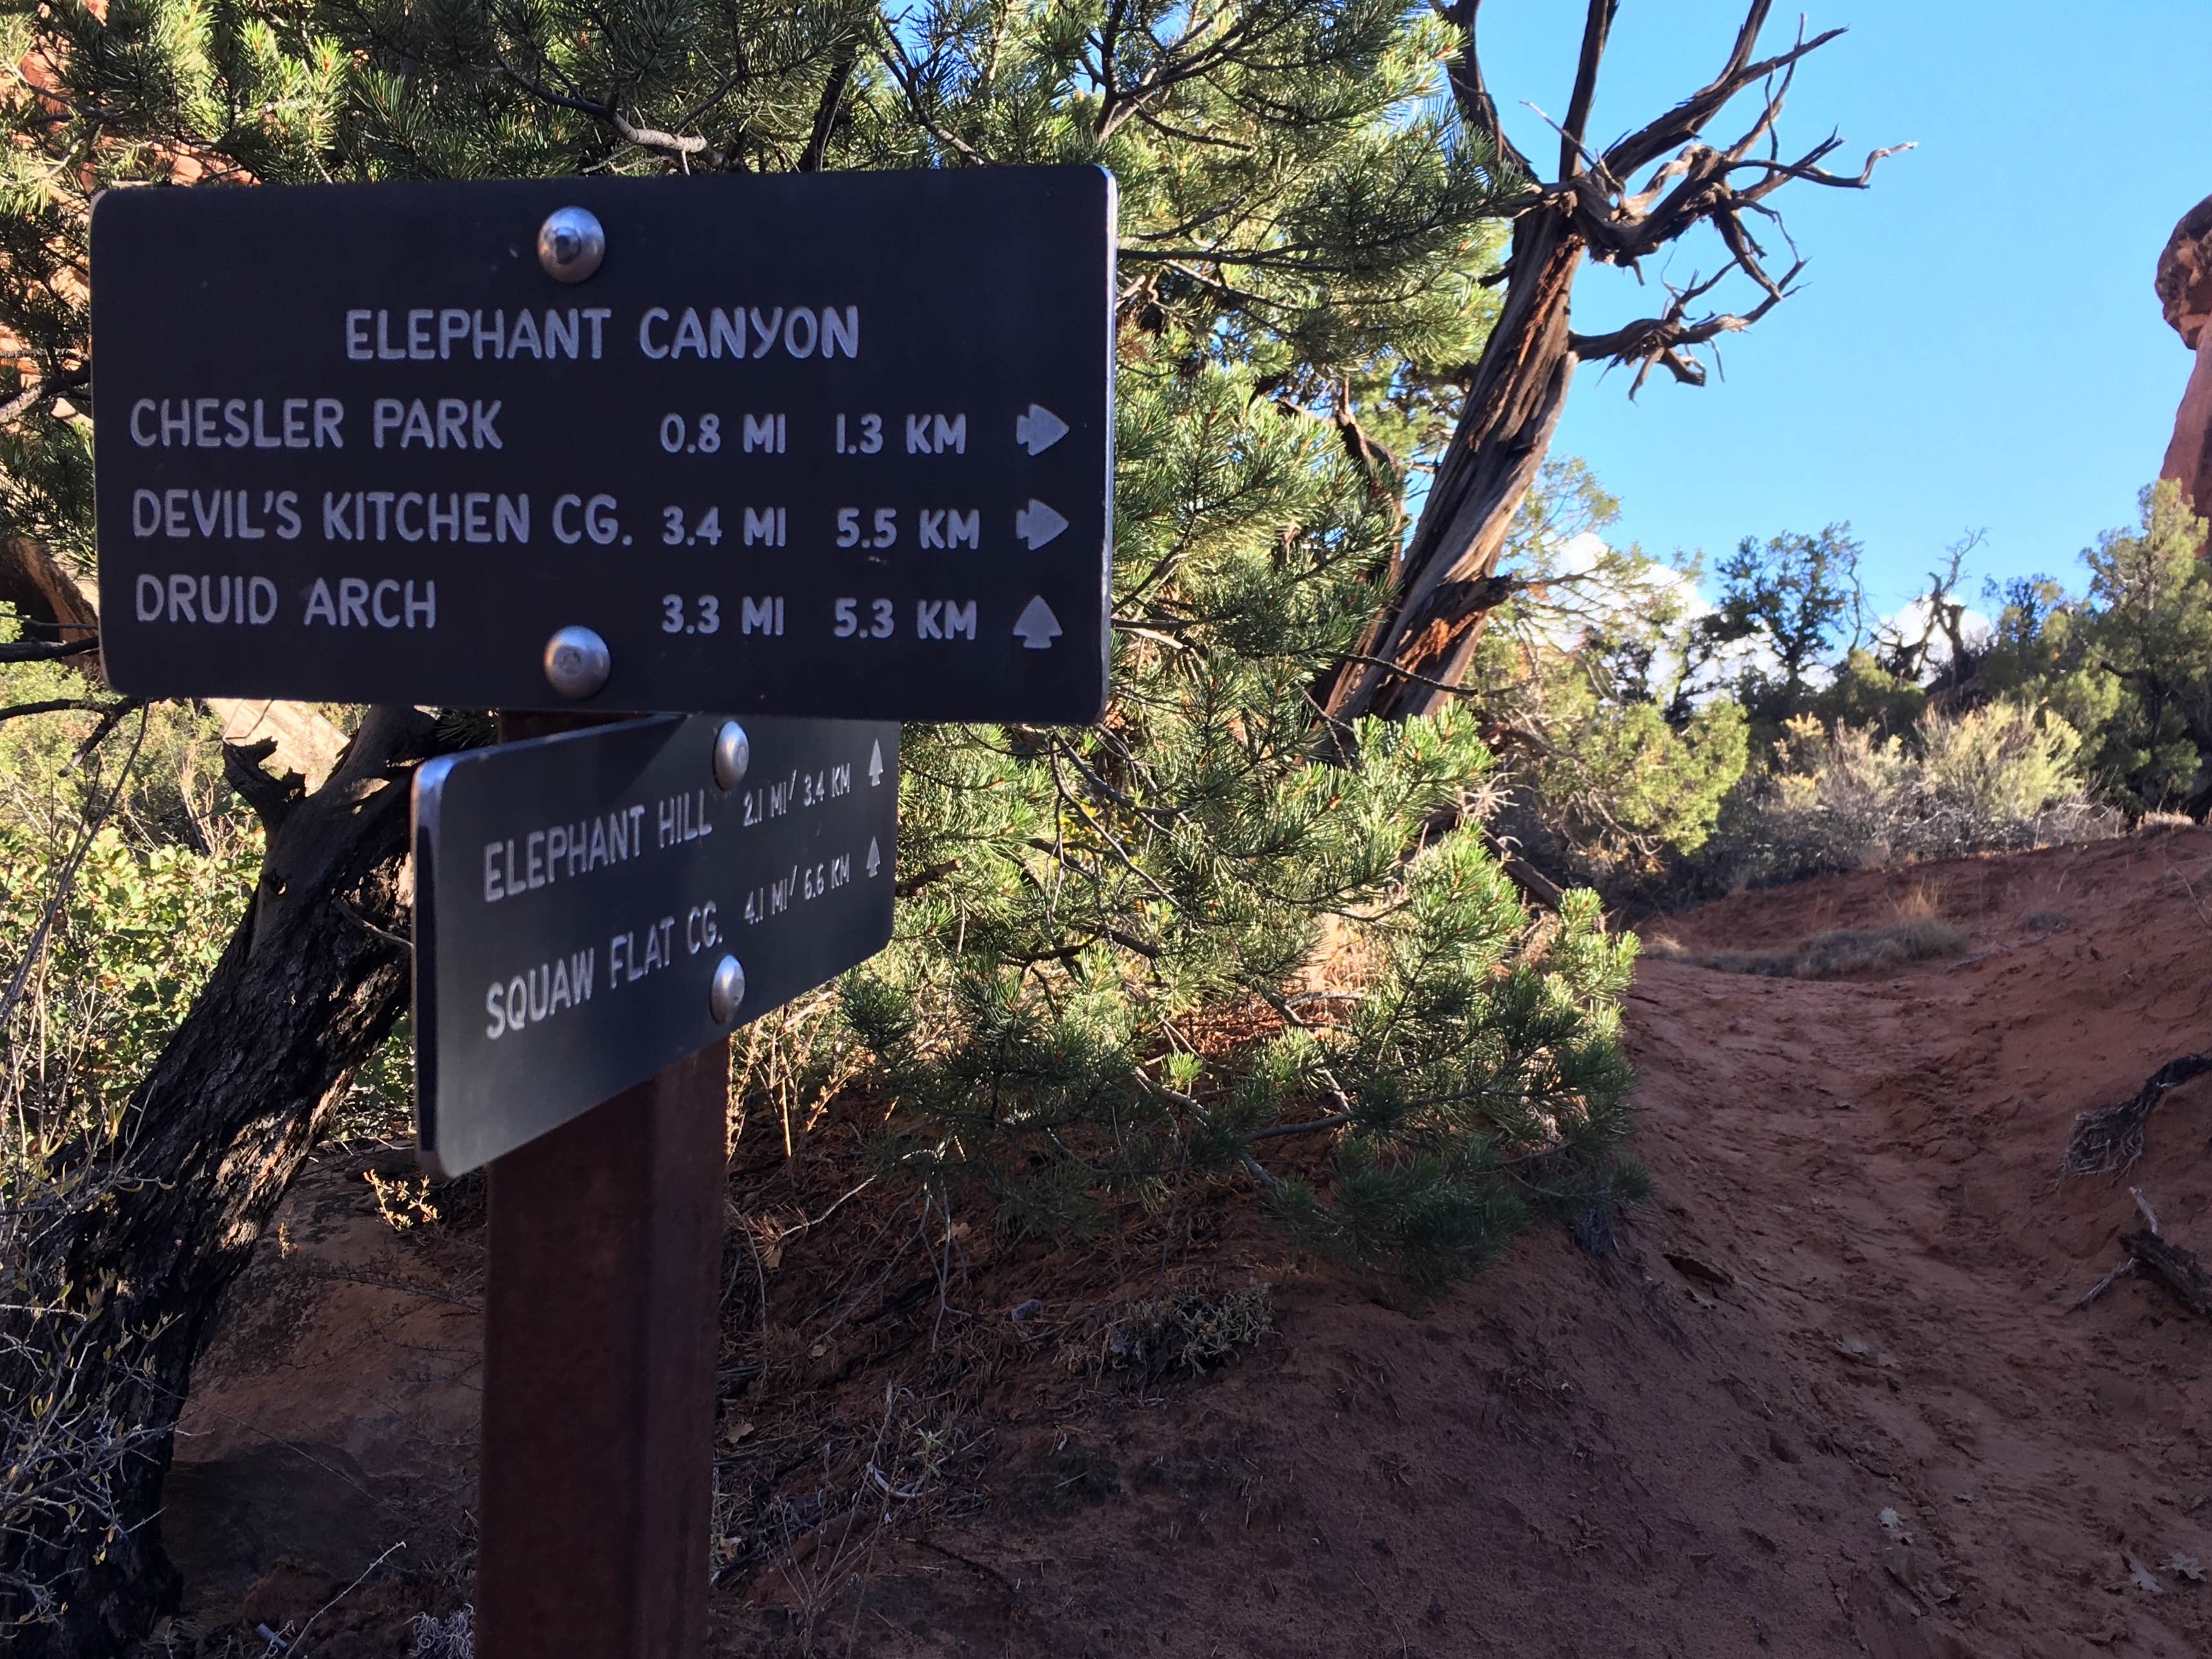 Camper submitted image from Elephant Canyon 2 (EC2) — Canyonlands National Park - 3